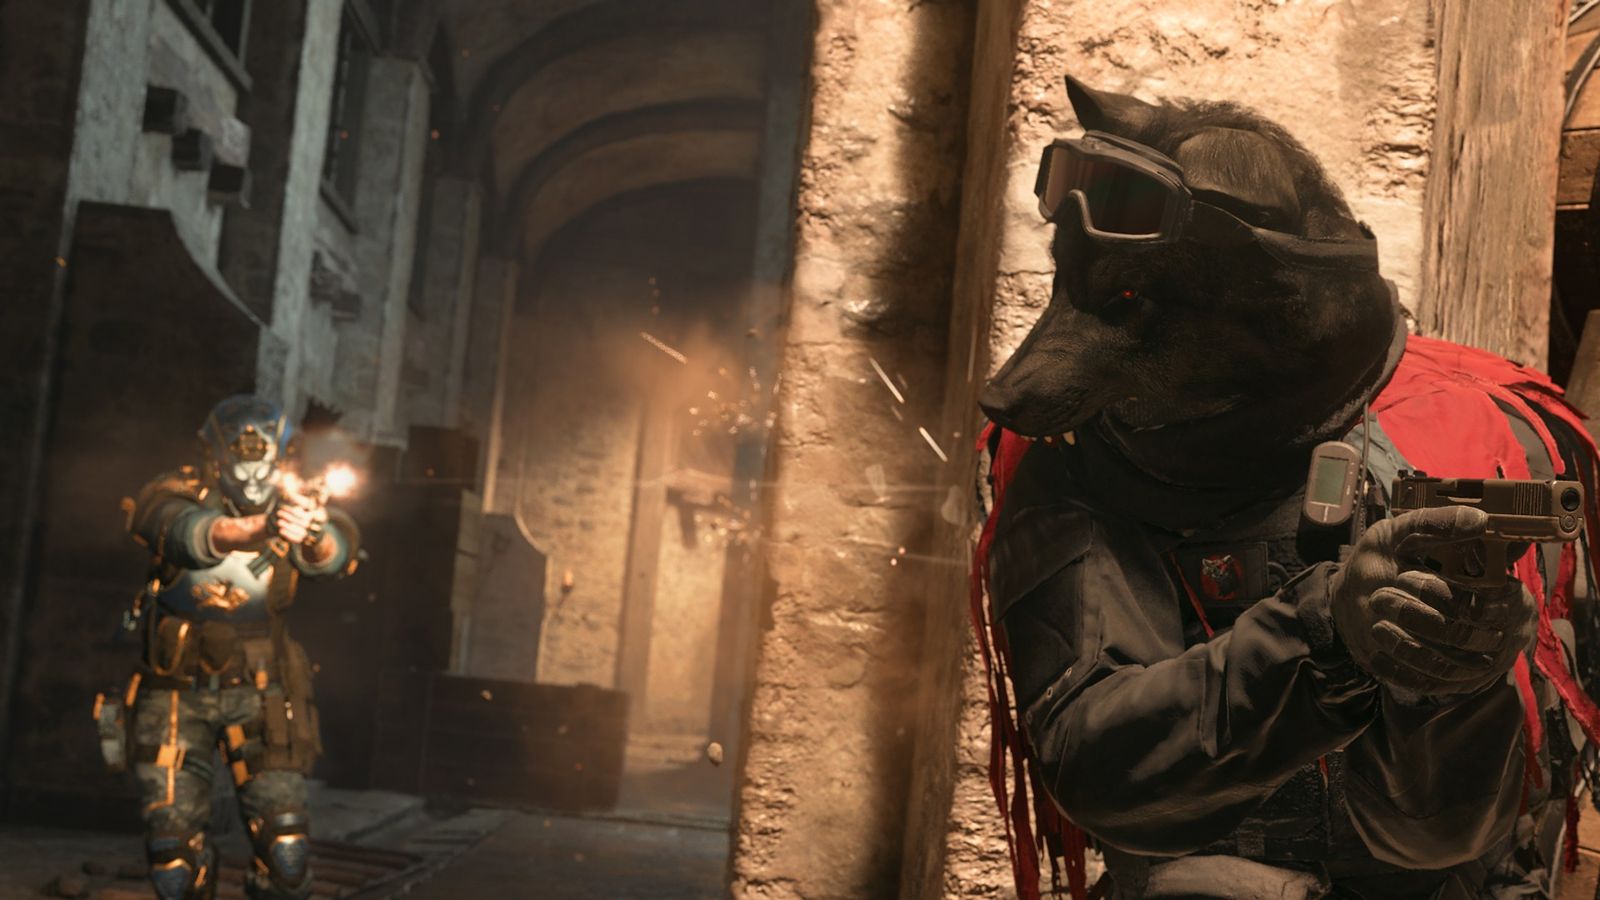 Screnshot of Warzone player dressed as a wolf hiding behind a wall holding a pistol with another Warzone player firing gun in background